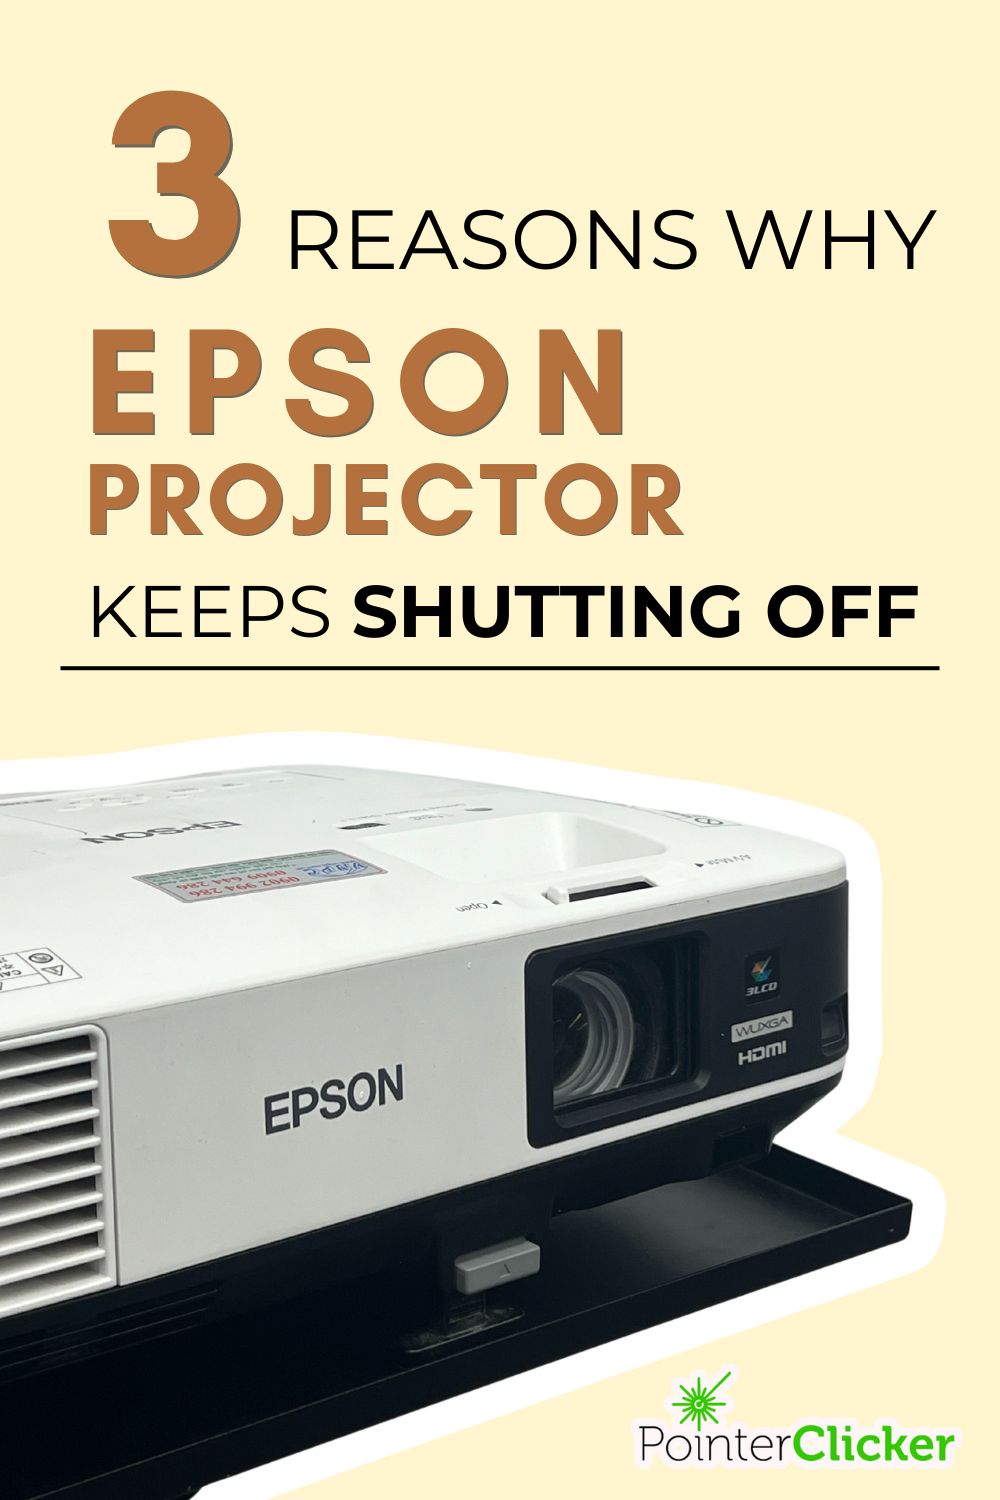 Why Does My Epson Projector Keep Shutting Off?